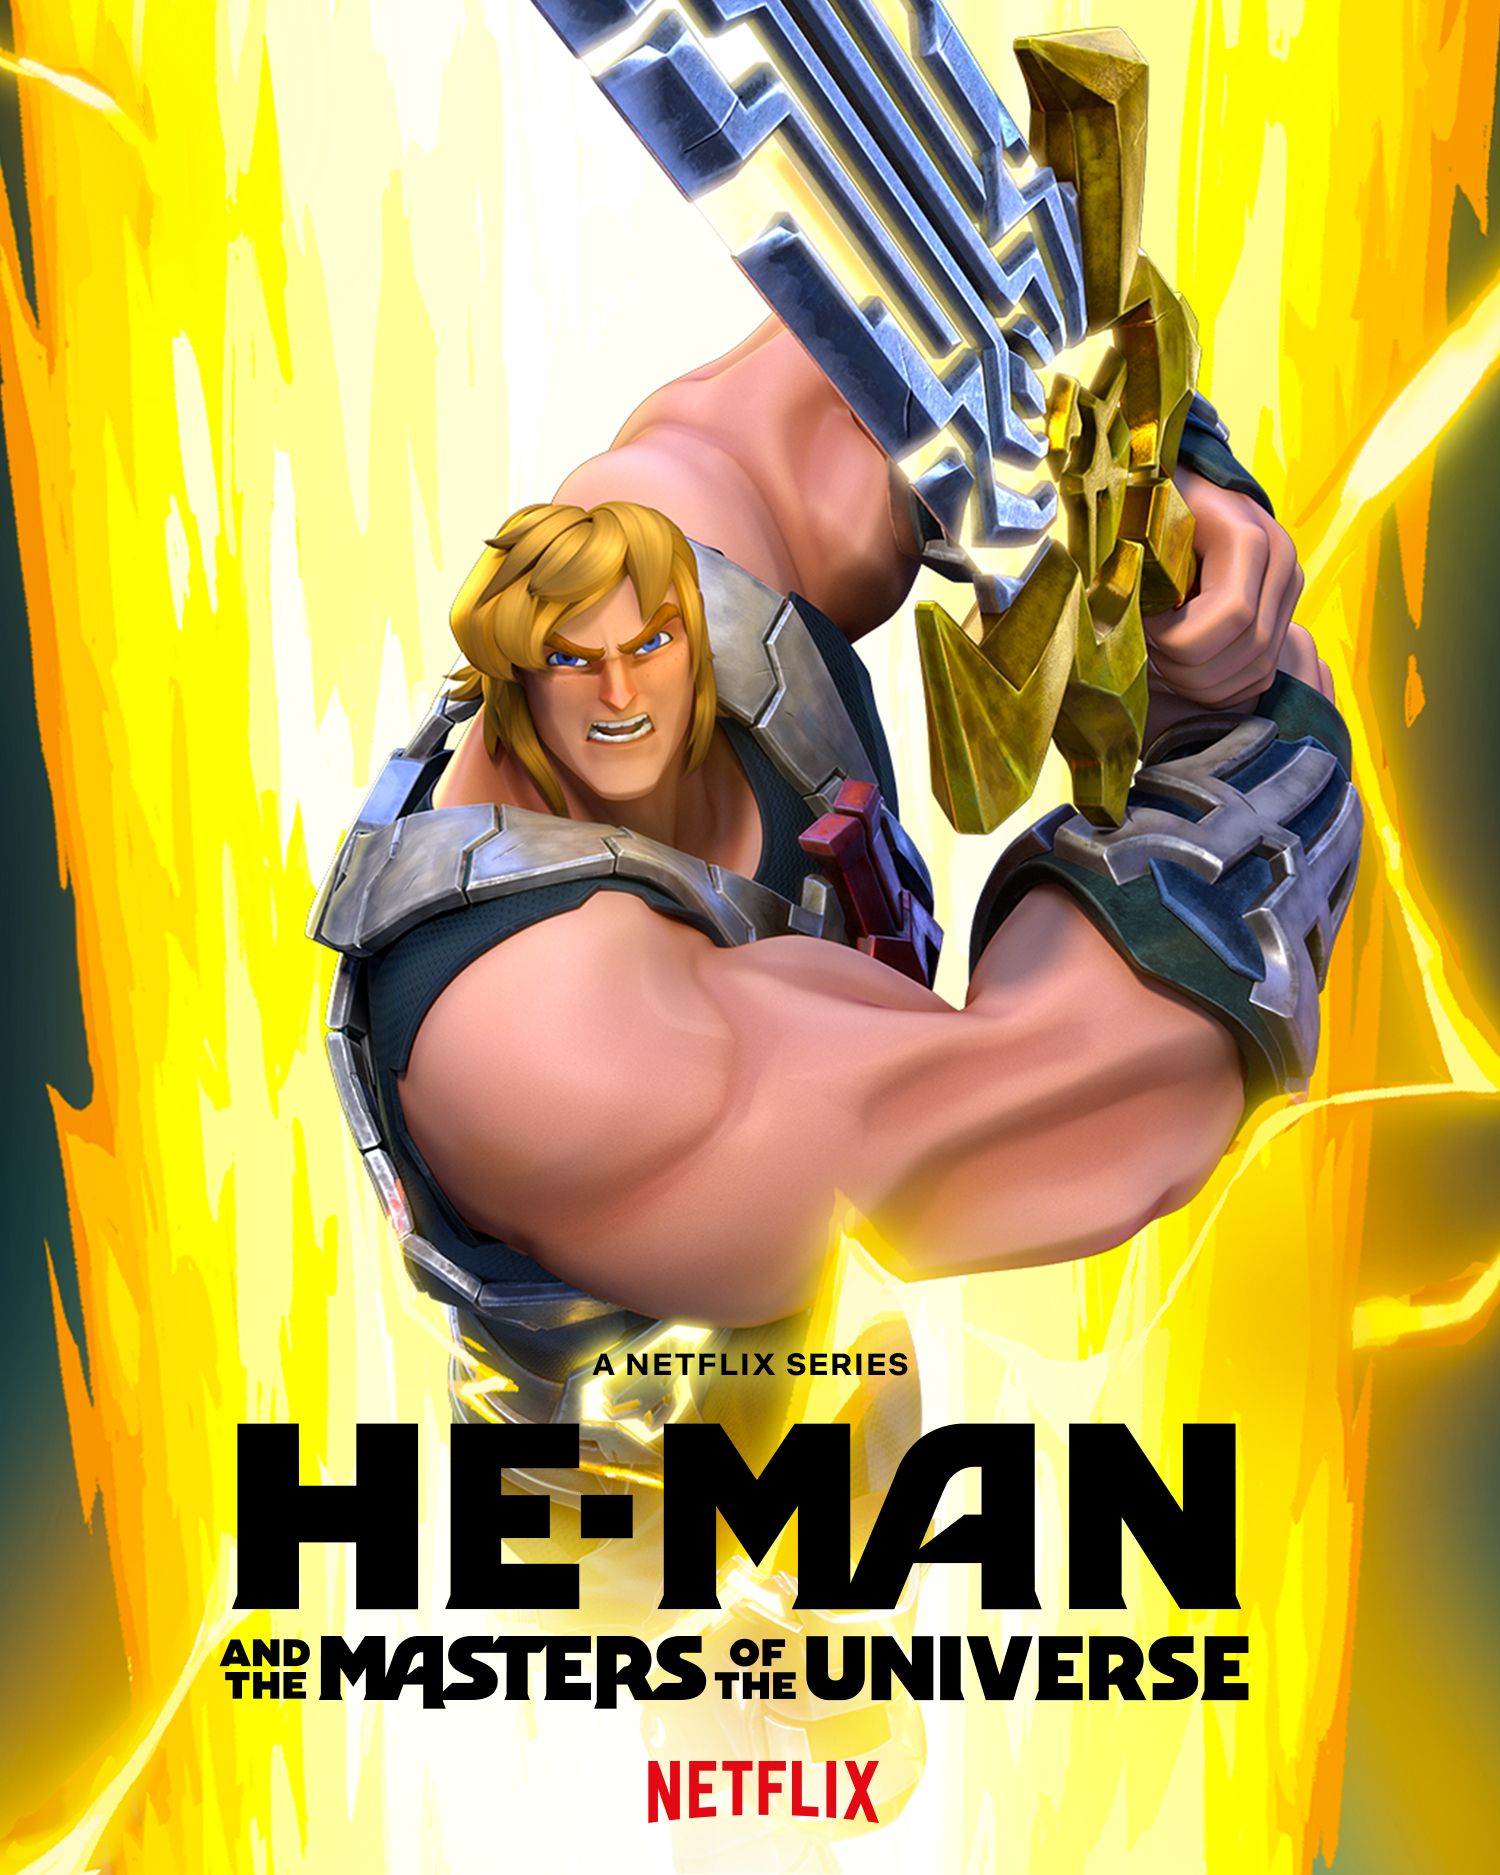 he-man-and-the-masters-of-the-universe-netflix-poster